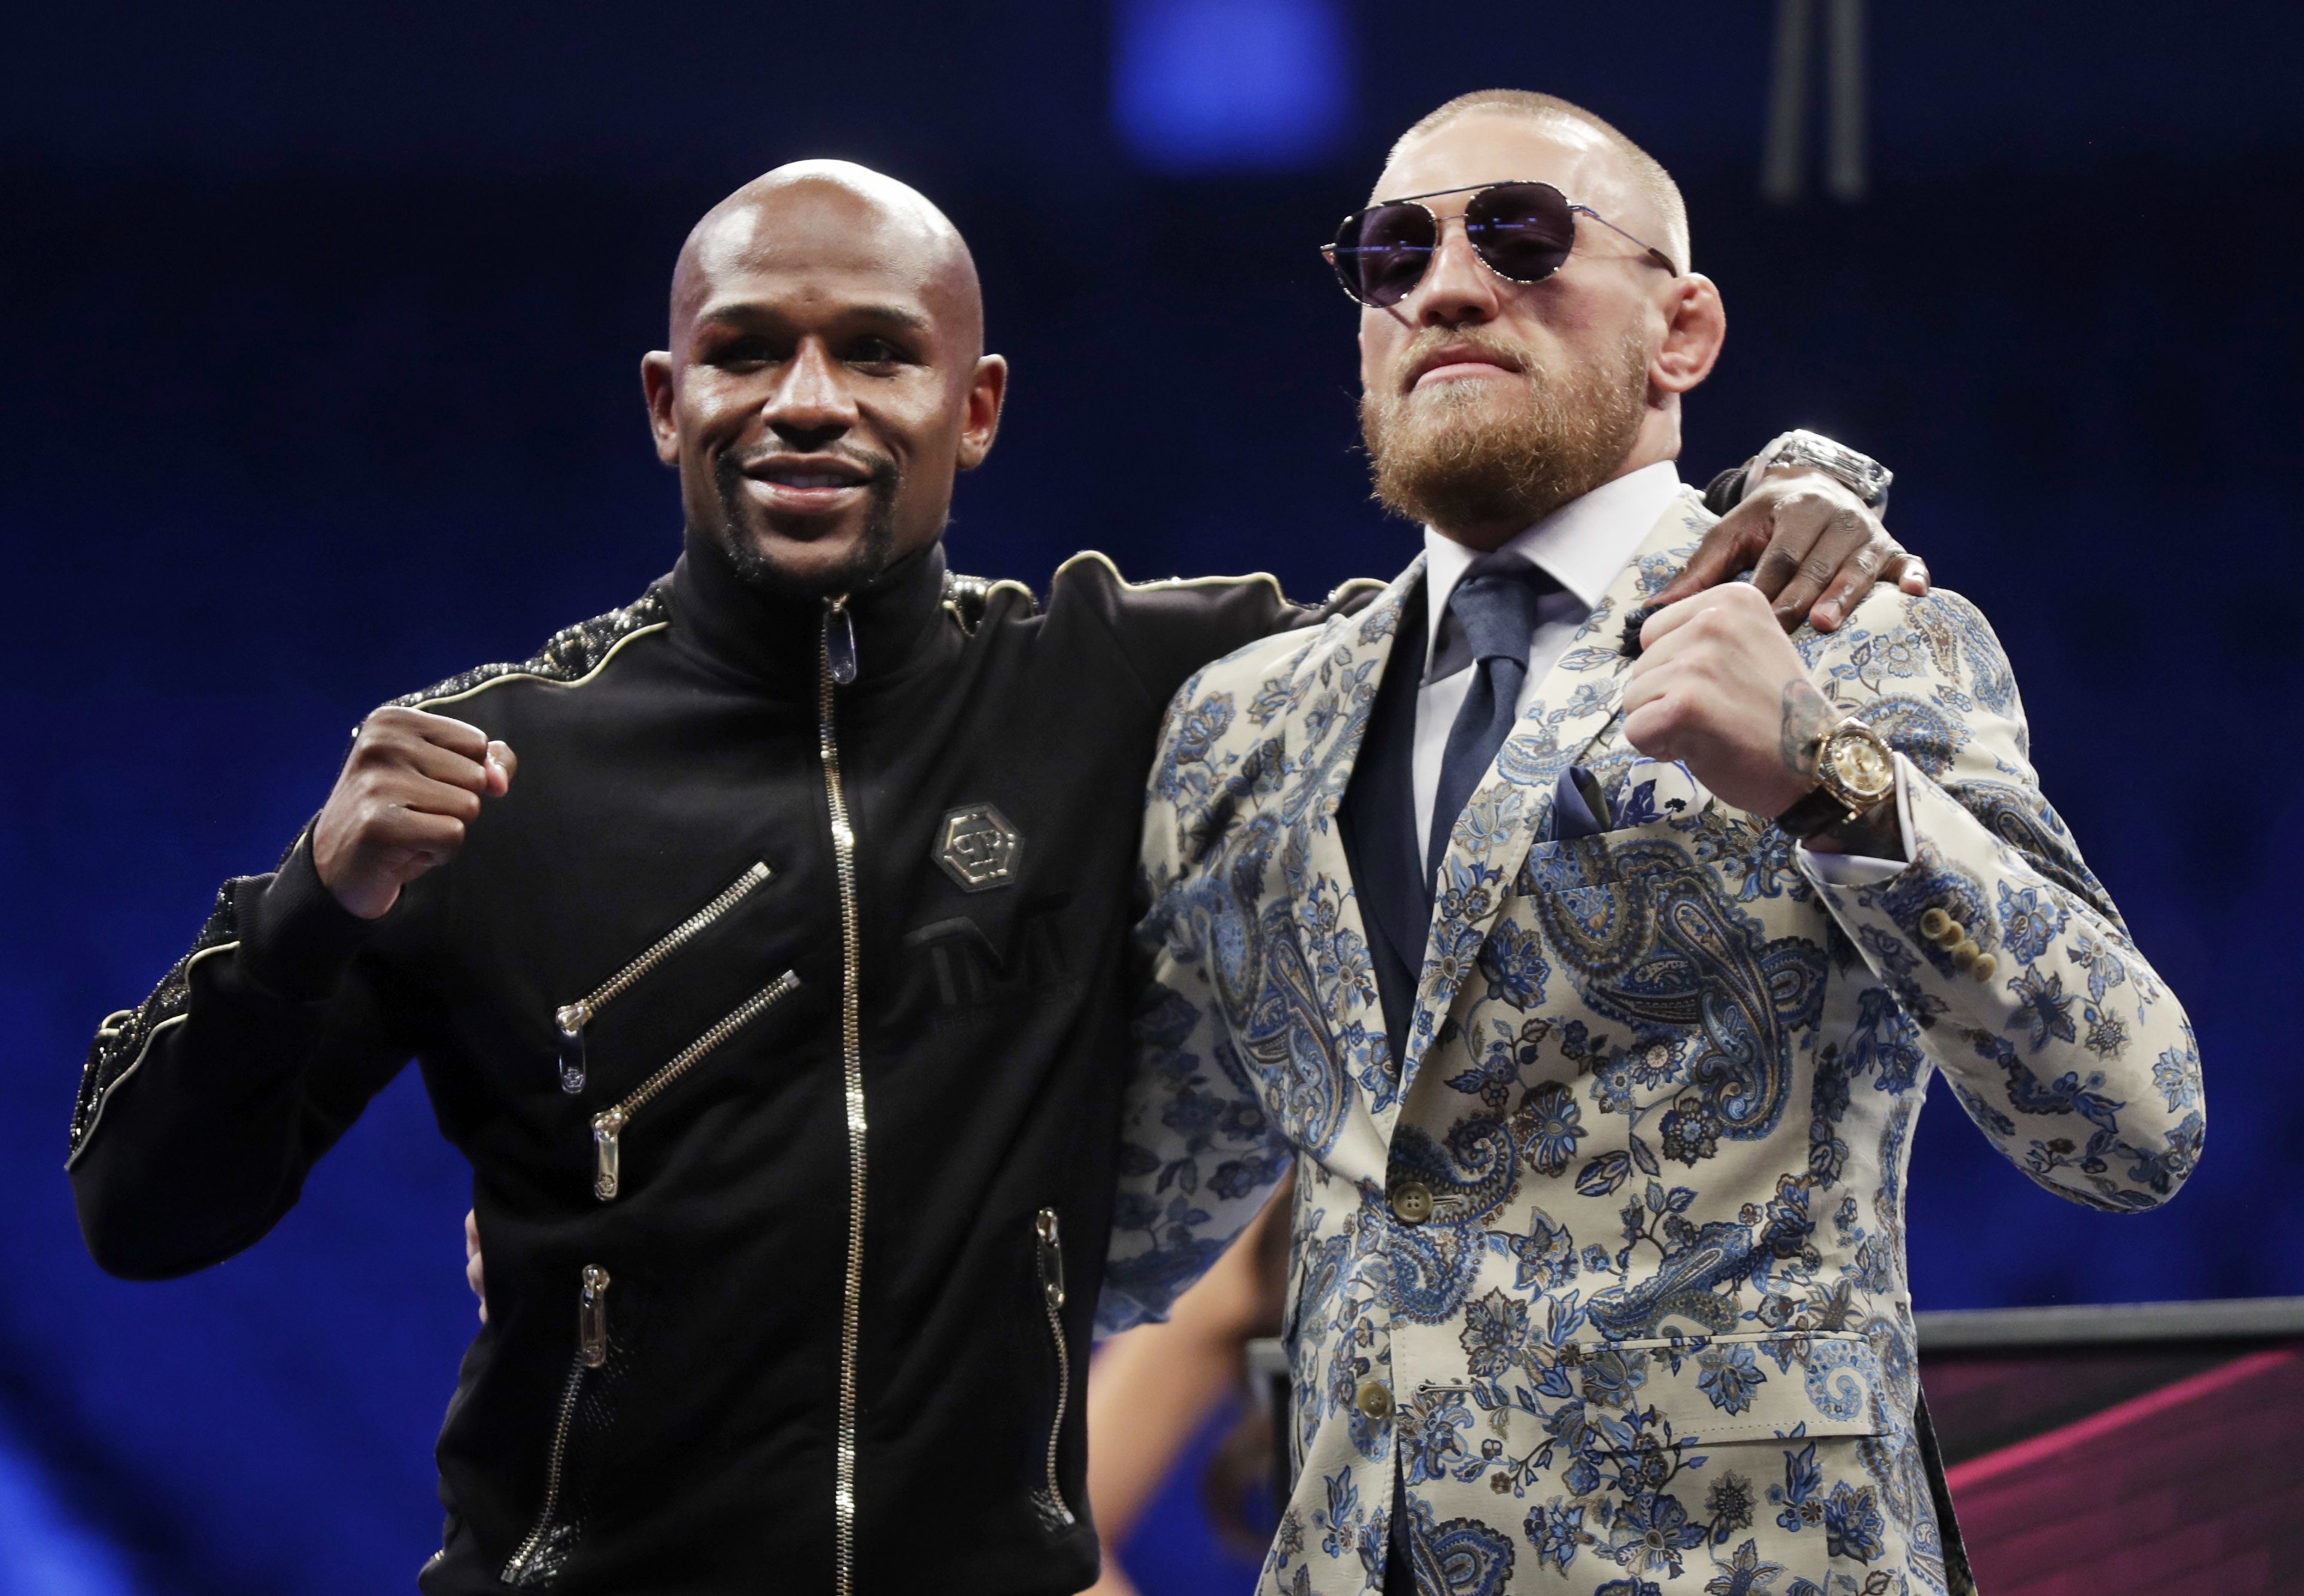 Conor McGregor claims he would defeat Floyd Mayweather Jnr where they to have a rematch. Photo: AP